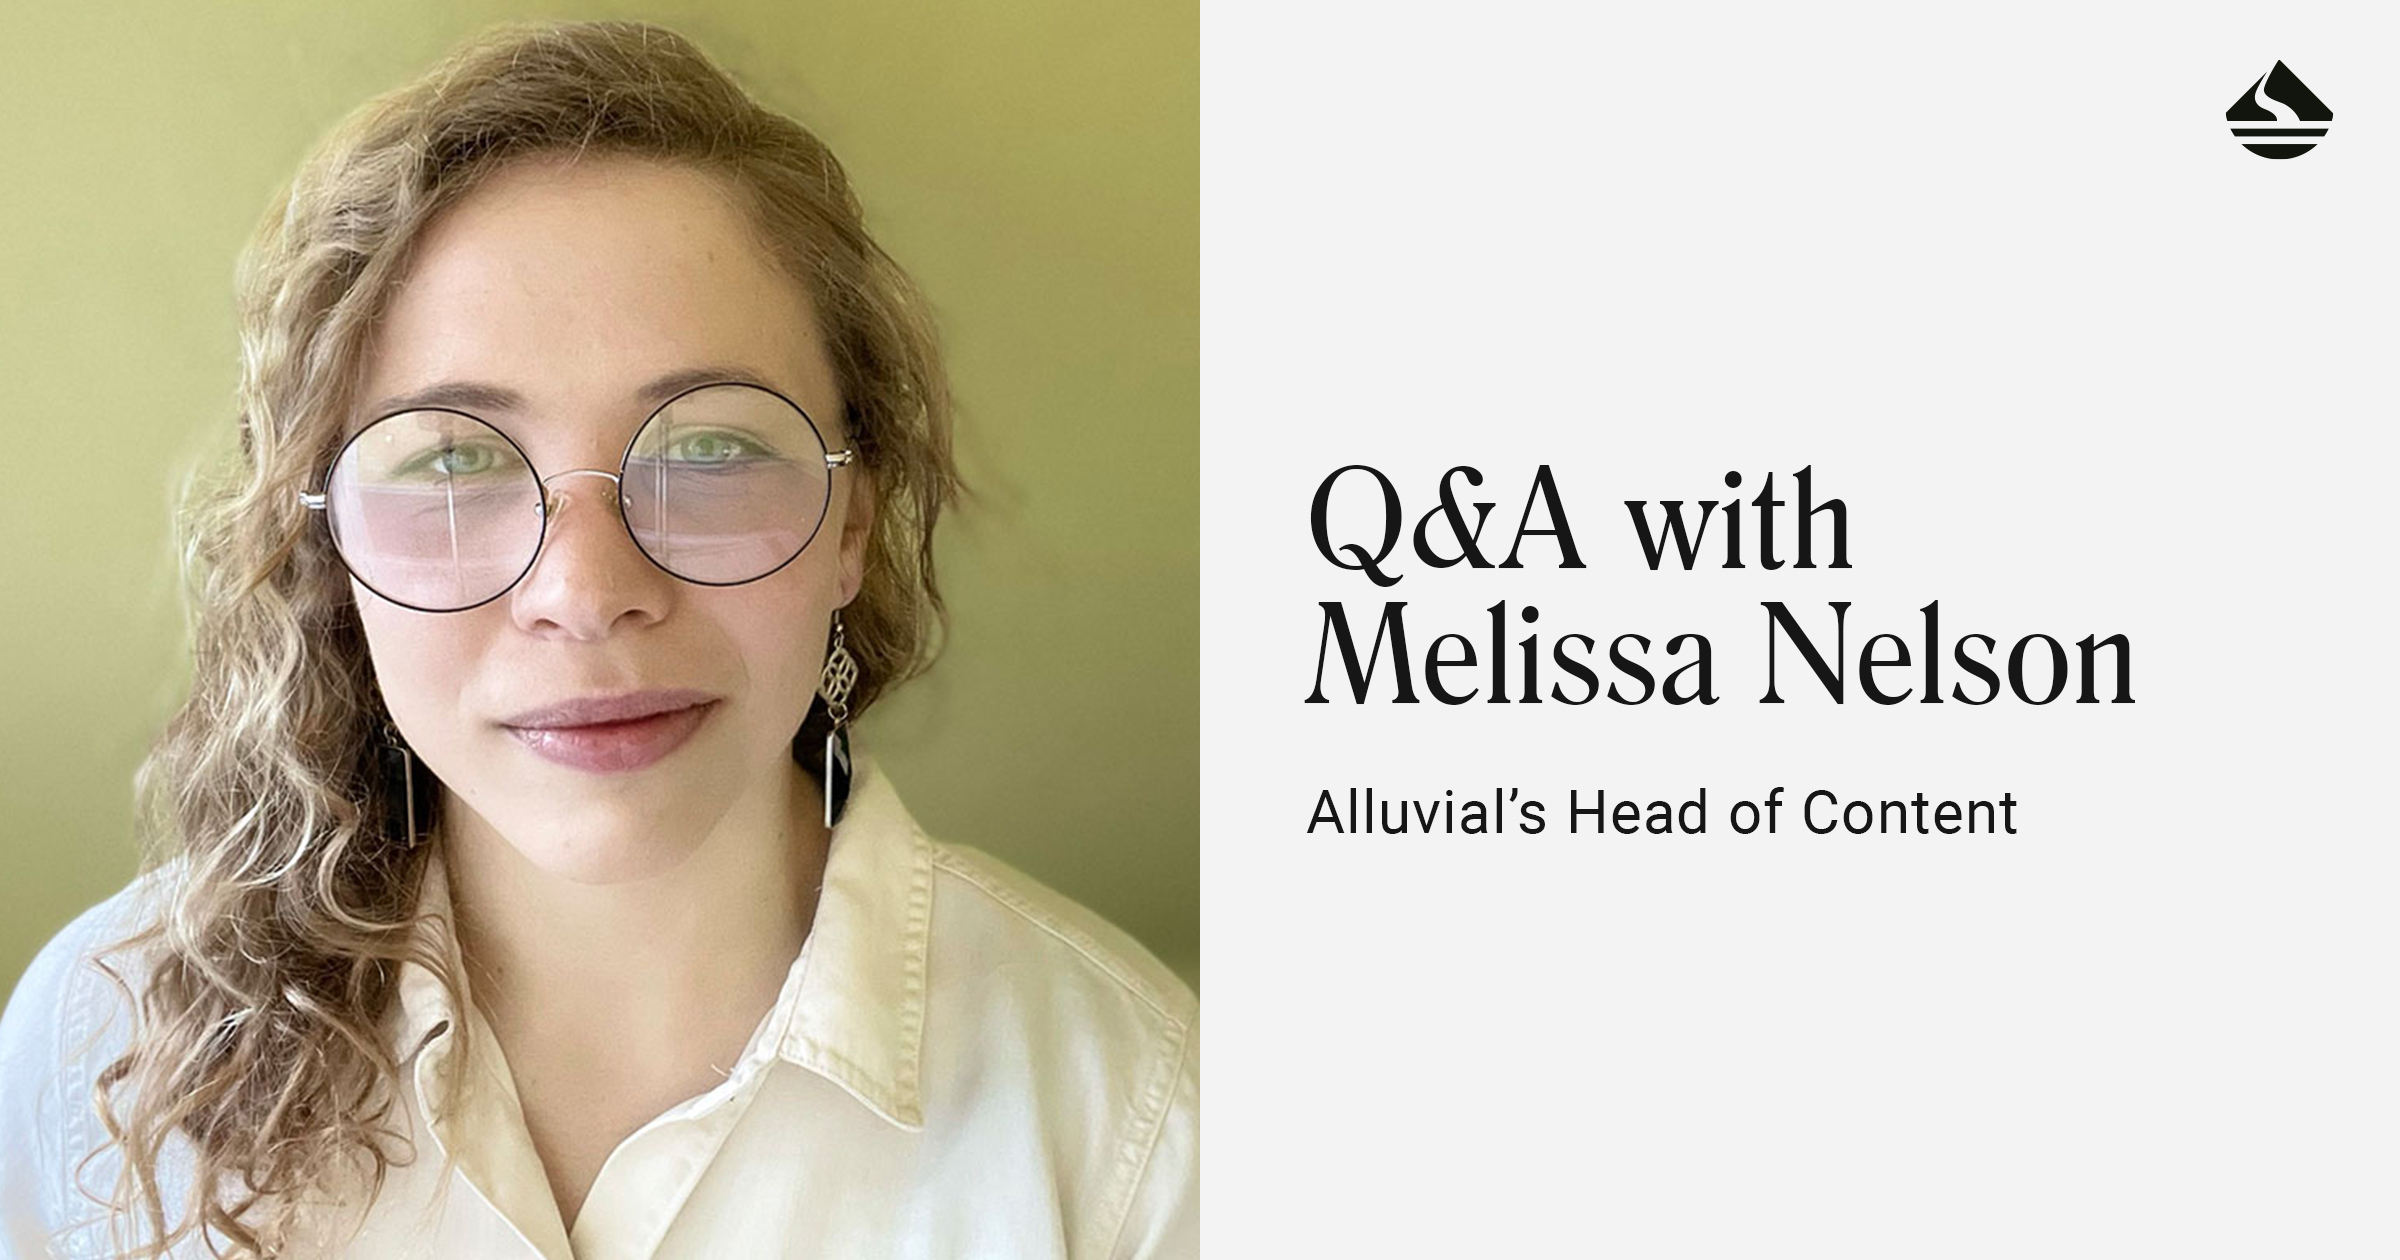 Q&A with Melissa Nelson, Alluvial